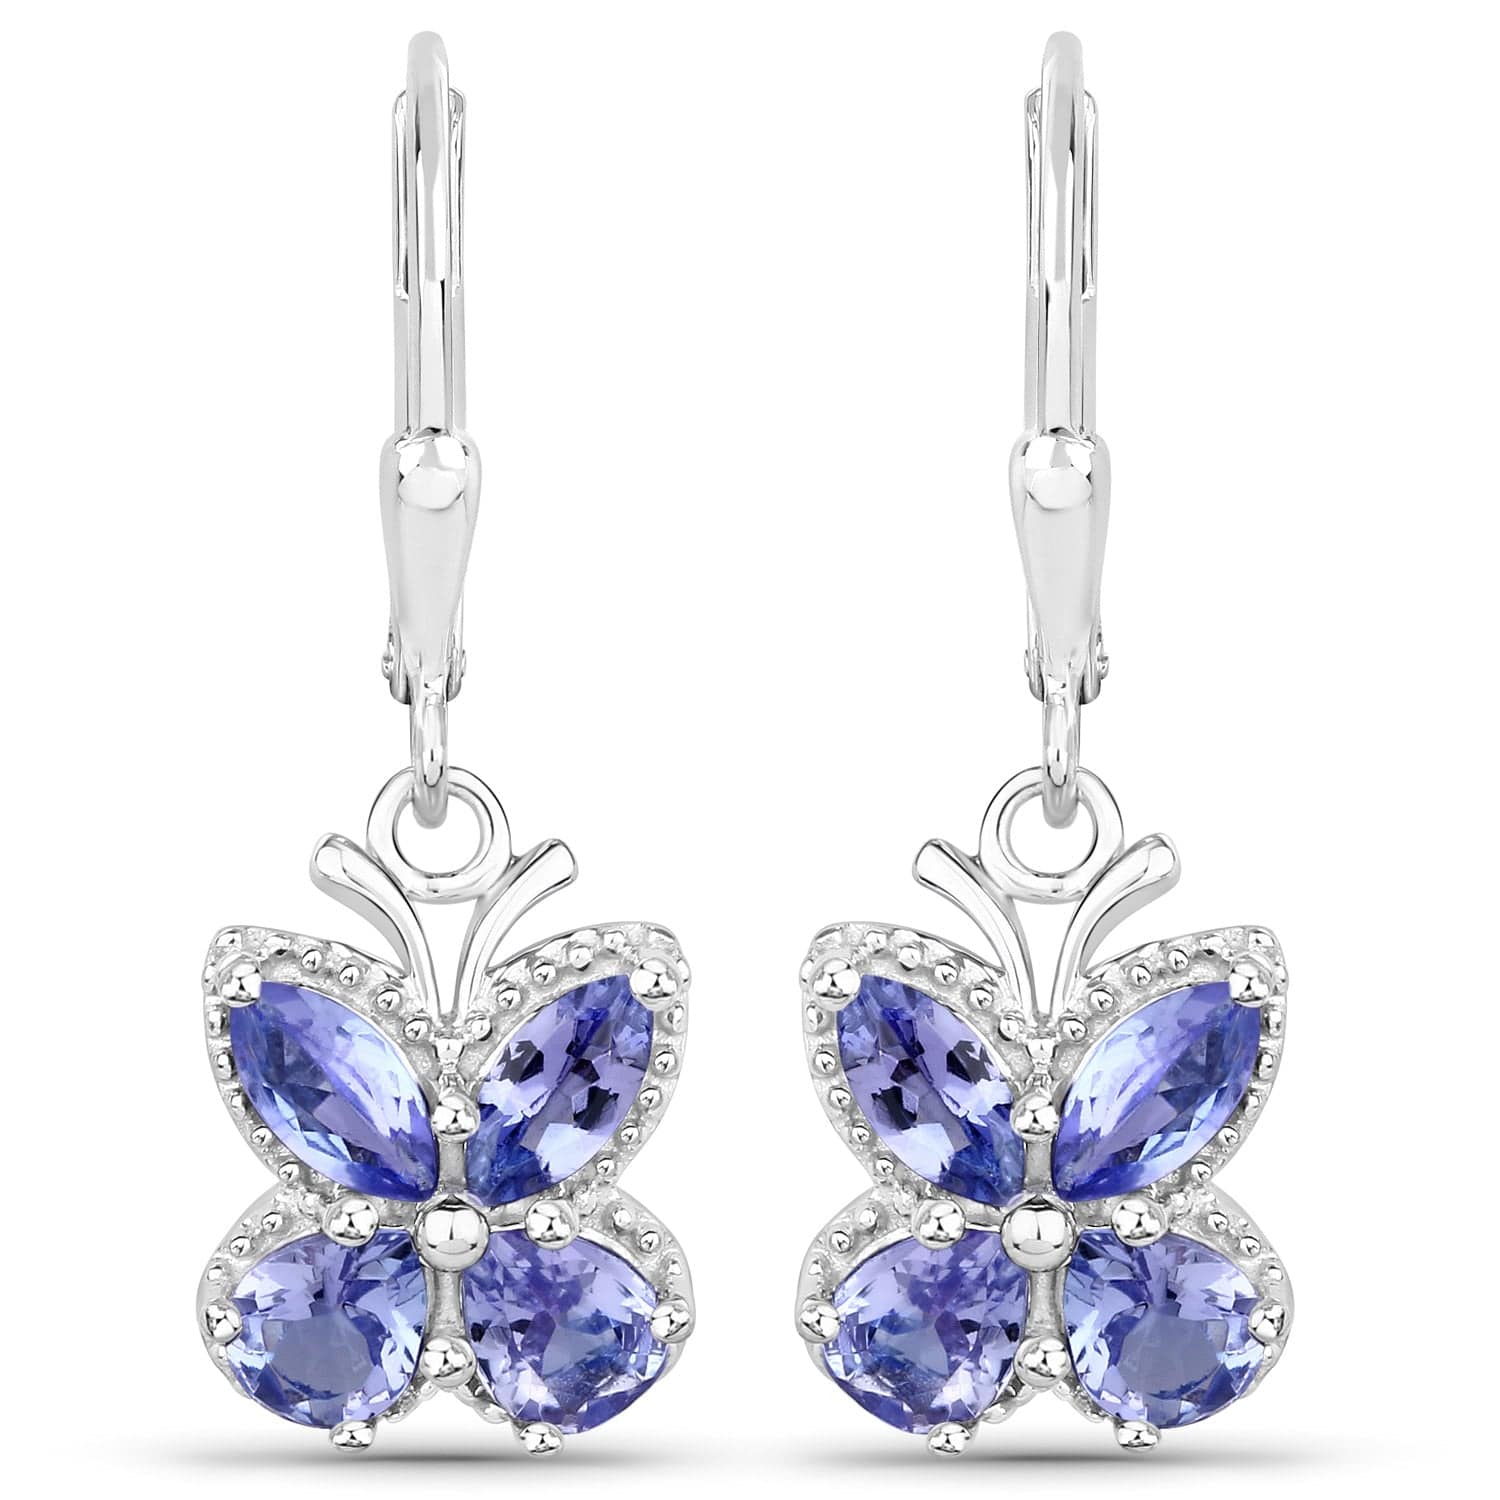 Gemstone Butterfly Drop Earrings Sterling Silver Tanzanite and Aquamarine